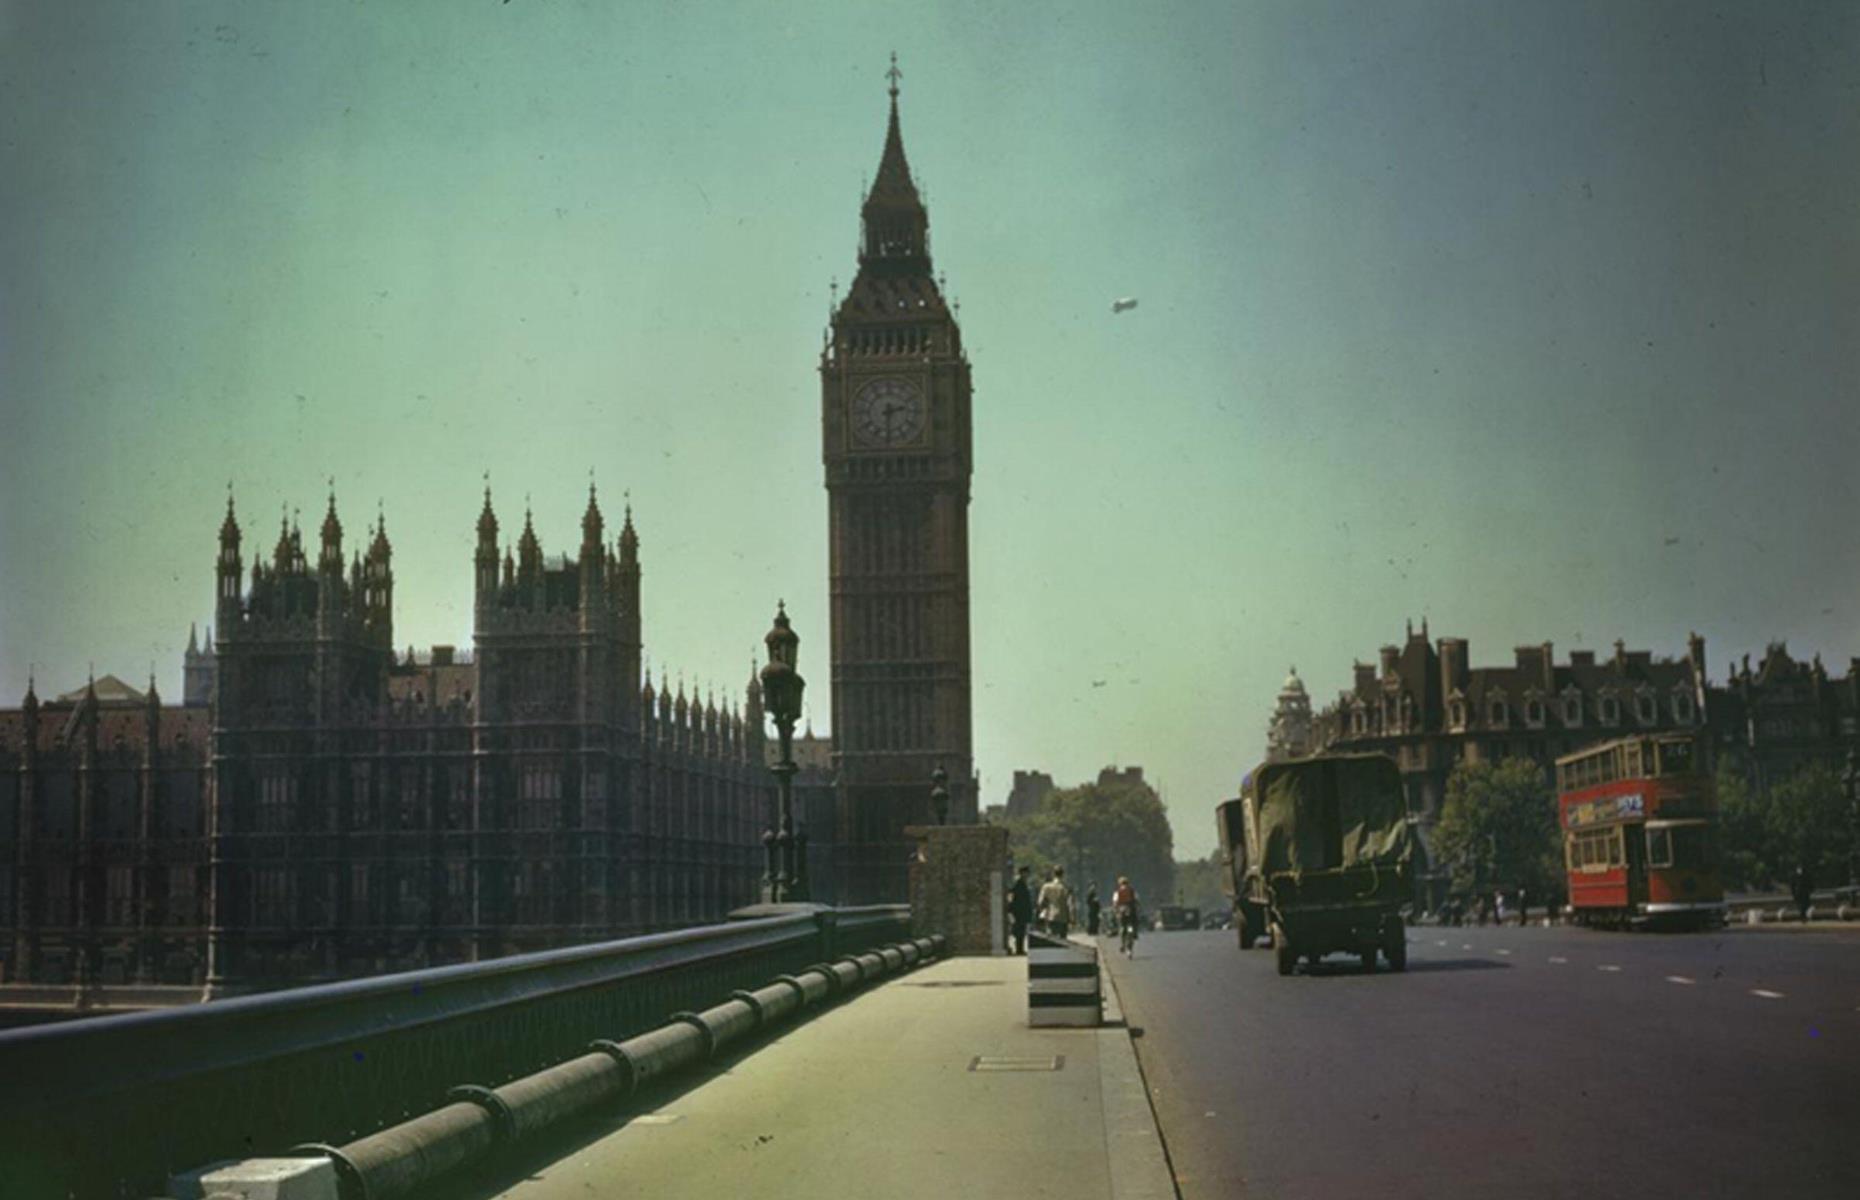 <p>Snapped during the Second World War, this picture shows the iconic Big Ben clock tower and adjoining Houses of Parliament seen from Westminster Bridge, with military vehicles and a vintage tram crossing the river and military barrage balloons in the sky in the background.  Construction of the clock tower began in 1843 and today the building stands at 315 feet (96m) tall.</p>  <p>While it would have been virtually deserted during the war, today one of London’s greatest landmarks receives around 4.5 million visitors per year.</p>